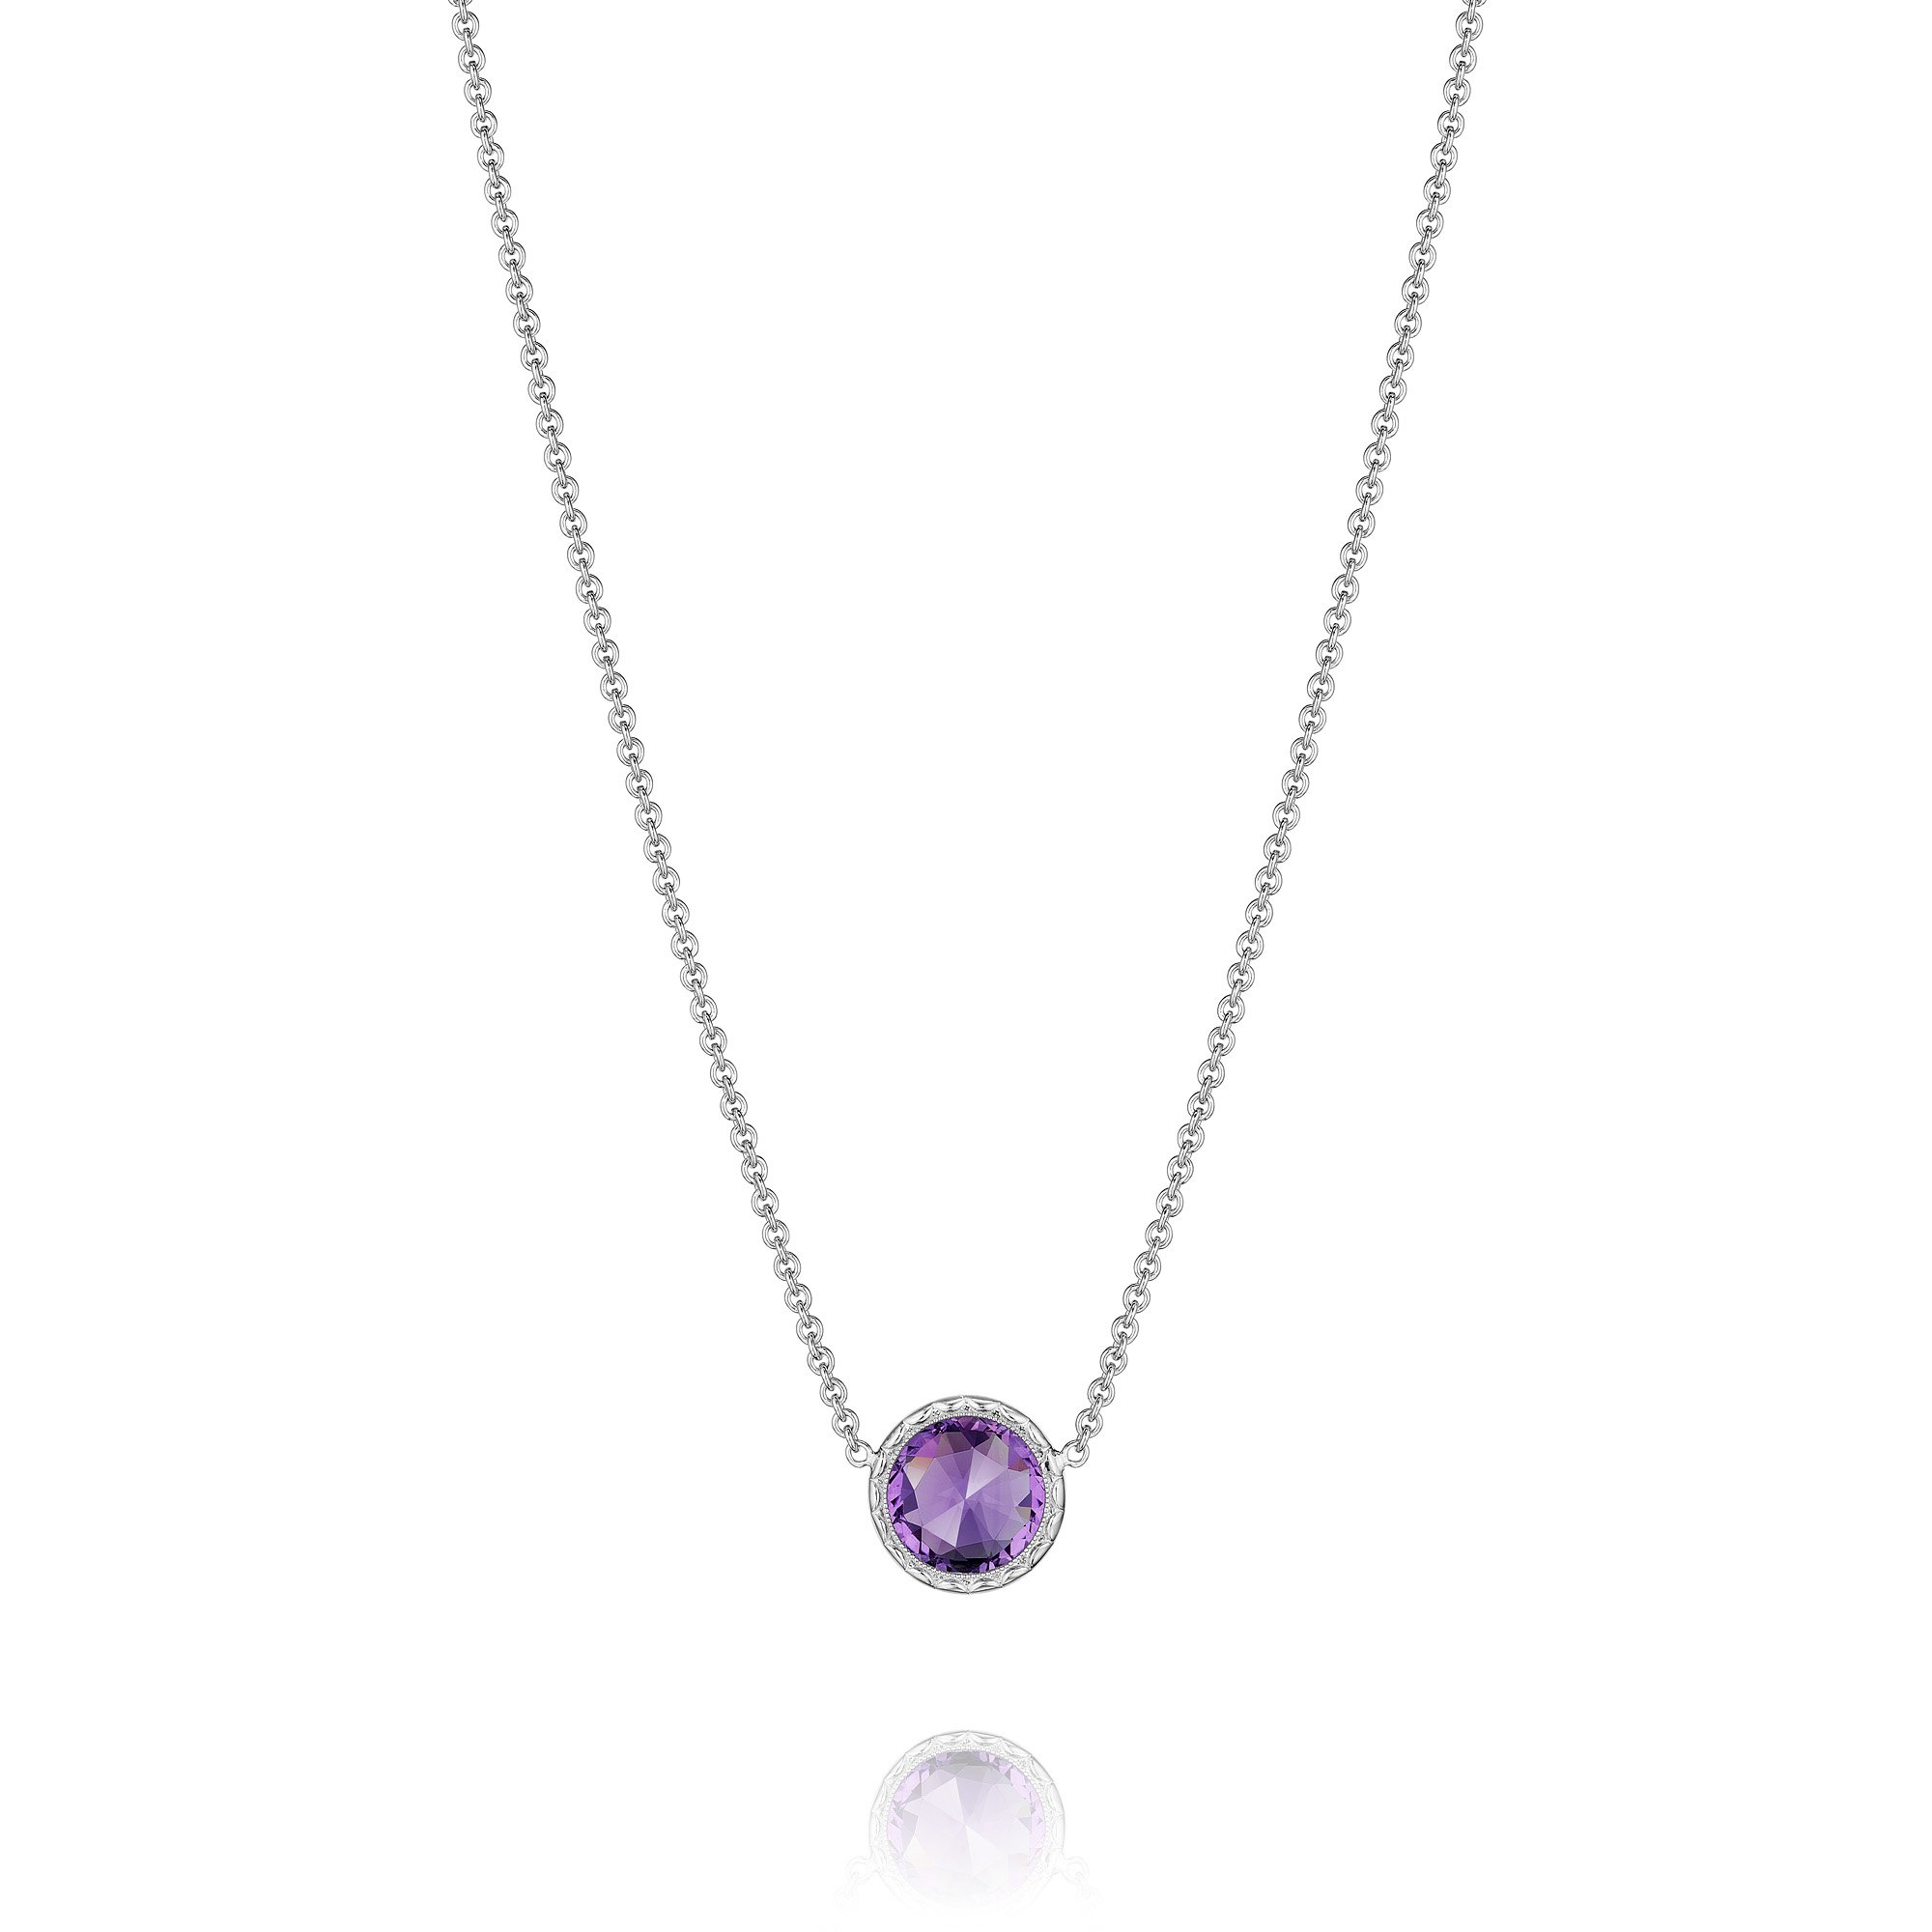 Tacori Sterling Silver Gemstone Necklaces. Diamond Engagement Rings ...